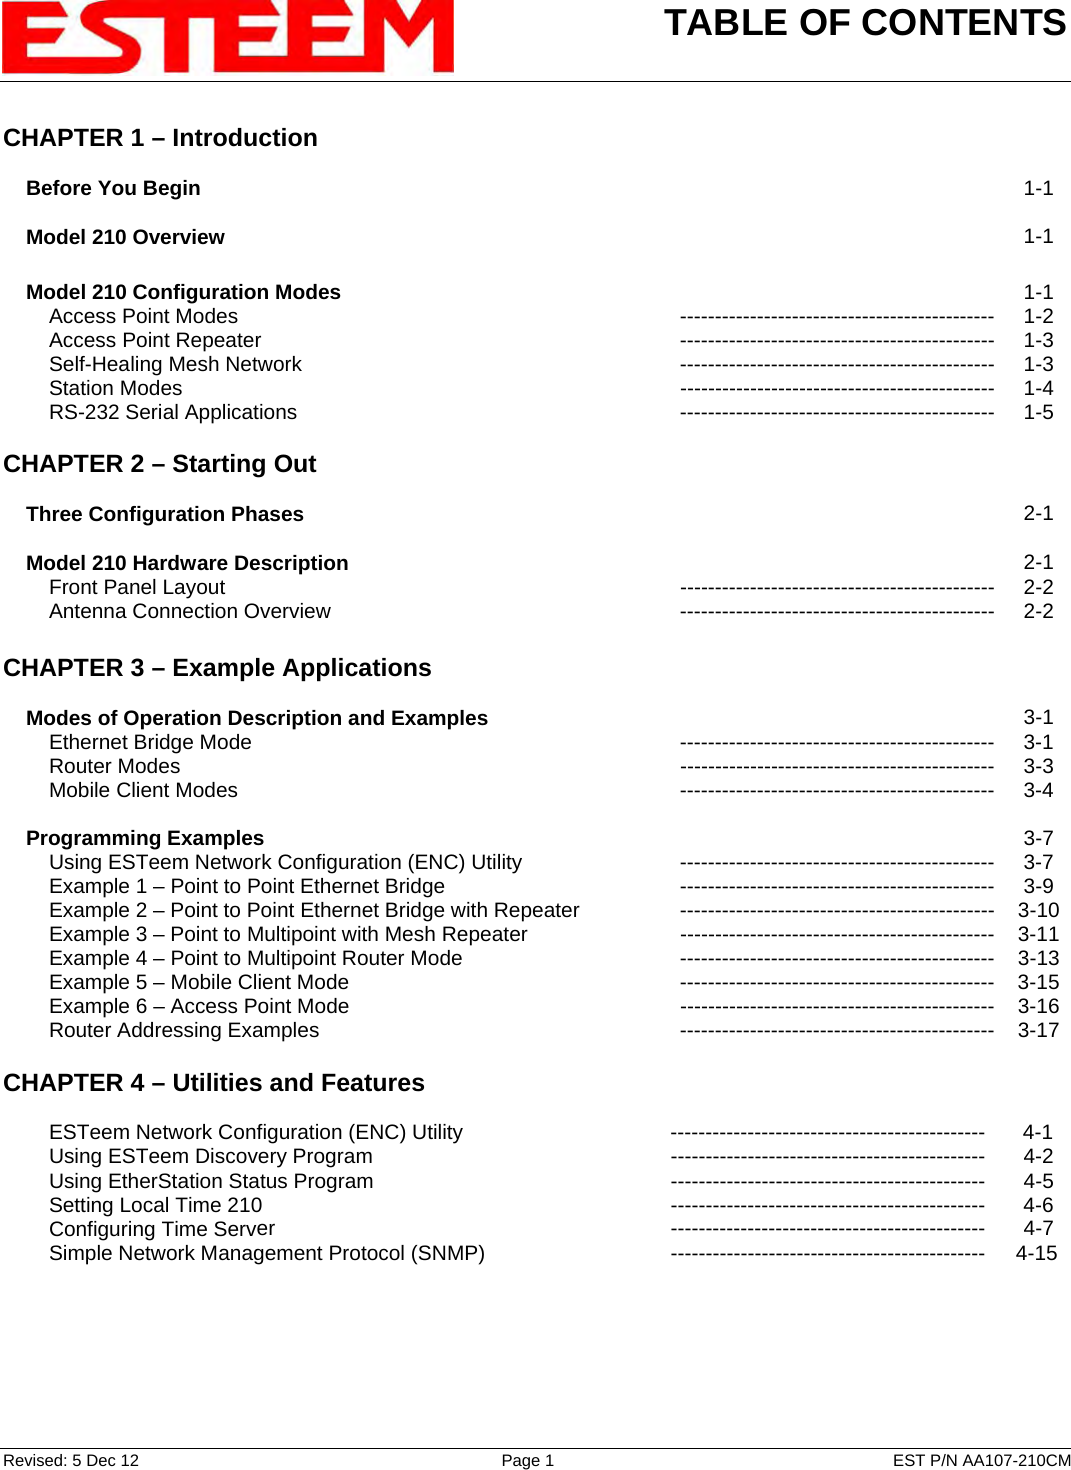 TABLE OF CONTENTS    Revised: 5 Dec 12  Page 1  EST P/N AA107-210CM CHAPTER 1 – Introduction      Before You Begin   1-1      Model 210 Overview   1-1        Model 210 Configuration Modes   1-1         Access Point Modes --------------------------------------------- 1-2         Access Point Repeater --------------------------------------------- 1-3         Self-Healing Mesh Network --------------------------------------------- 1-3         Station Modes  --------------------------------------------- 1-4         RS-232 Serial Applications --------------------------------------------- 1-5    CHAPTER 2 – Starting Out          Three Configuration Phases   2-1        Model 210 Hardware Description   2-1         Front Panel Layout --------------------------------------------- 2-2         Antenna Connection Overview --------------------------------------------- 2-2    CHAPTER 3 – Example Applications          Modes of Operation Description and Examples   3-1         Ethernet Bridge Mode --------------------------------------------- 3-1         Router Modes  --------------------------------------------- 3-3         Mobile Client Modes --------------------------------------------- 3-4        Programming Examples   3-7         Using ESTeem Network Configuration (ENC) Utility --------------------------------------------- 3-7         Example 1 – Point to Point Ethernet Bridge --------------------------------------------- 3-9         Example 2 – Point to Point Ethernet Bridge with Repeater --------------------------------------------- 3-10         Example 3 – Point to Multipoint with Mesh Repeater  --------------------------------------------- 3-11         Example 4 – Point to Multipoint Router Mode --------------------------------------------- 3-13         Example 5 – Mobile Client Mode  --------------------------------------------- 3-15         Example 6 – Access Point Mode  --------------------------------------------- 3-16         Router Addressing Examples   --------------------------------------------- 3-17   CHAPTER 4 – Utilities and Features             ESTeem Network Configuration (ENC) Utility  ---------------------------------------------  4-1         Using ESTeem Discovery Program  ---------------------------------------------  4-2         Using EtherStation Status Program --------------------------------------------- 4-5         Setting Local Time 210  ---------------------------------------------  4-6         Configuring Time Server --------------------------------------------- 4-7         Simple Network Management Protocol (SNMP) ---------------------------------------------  4-15 